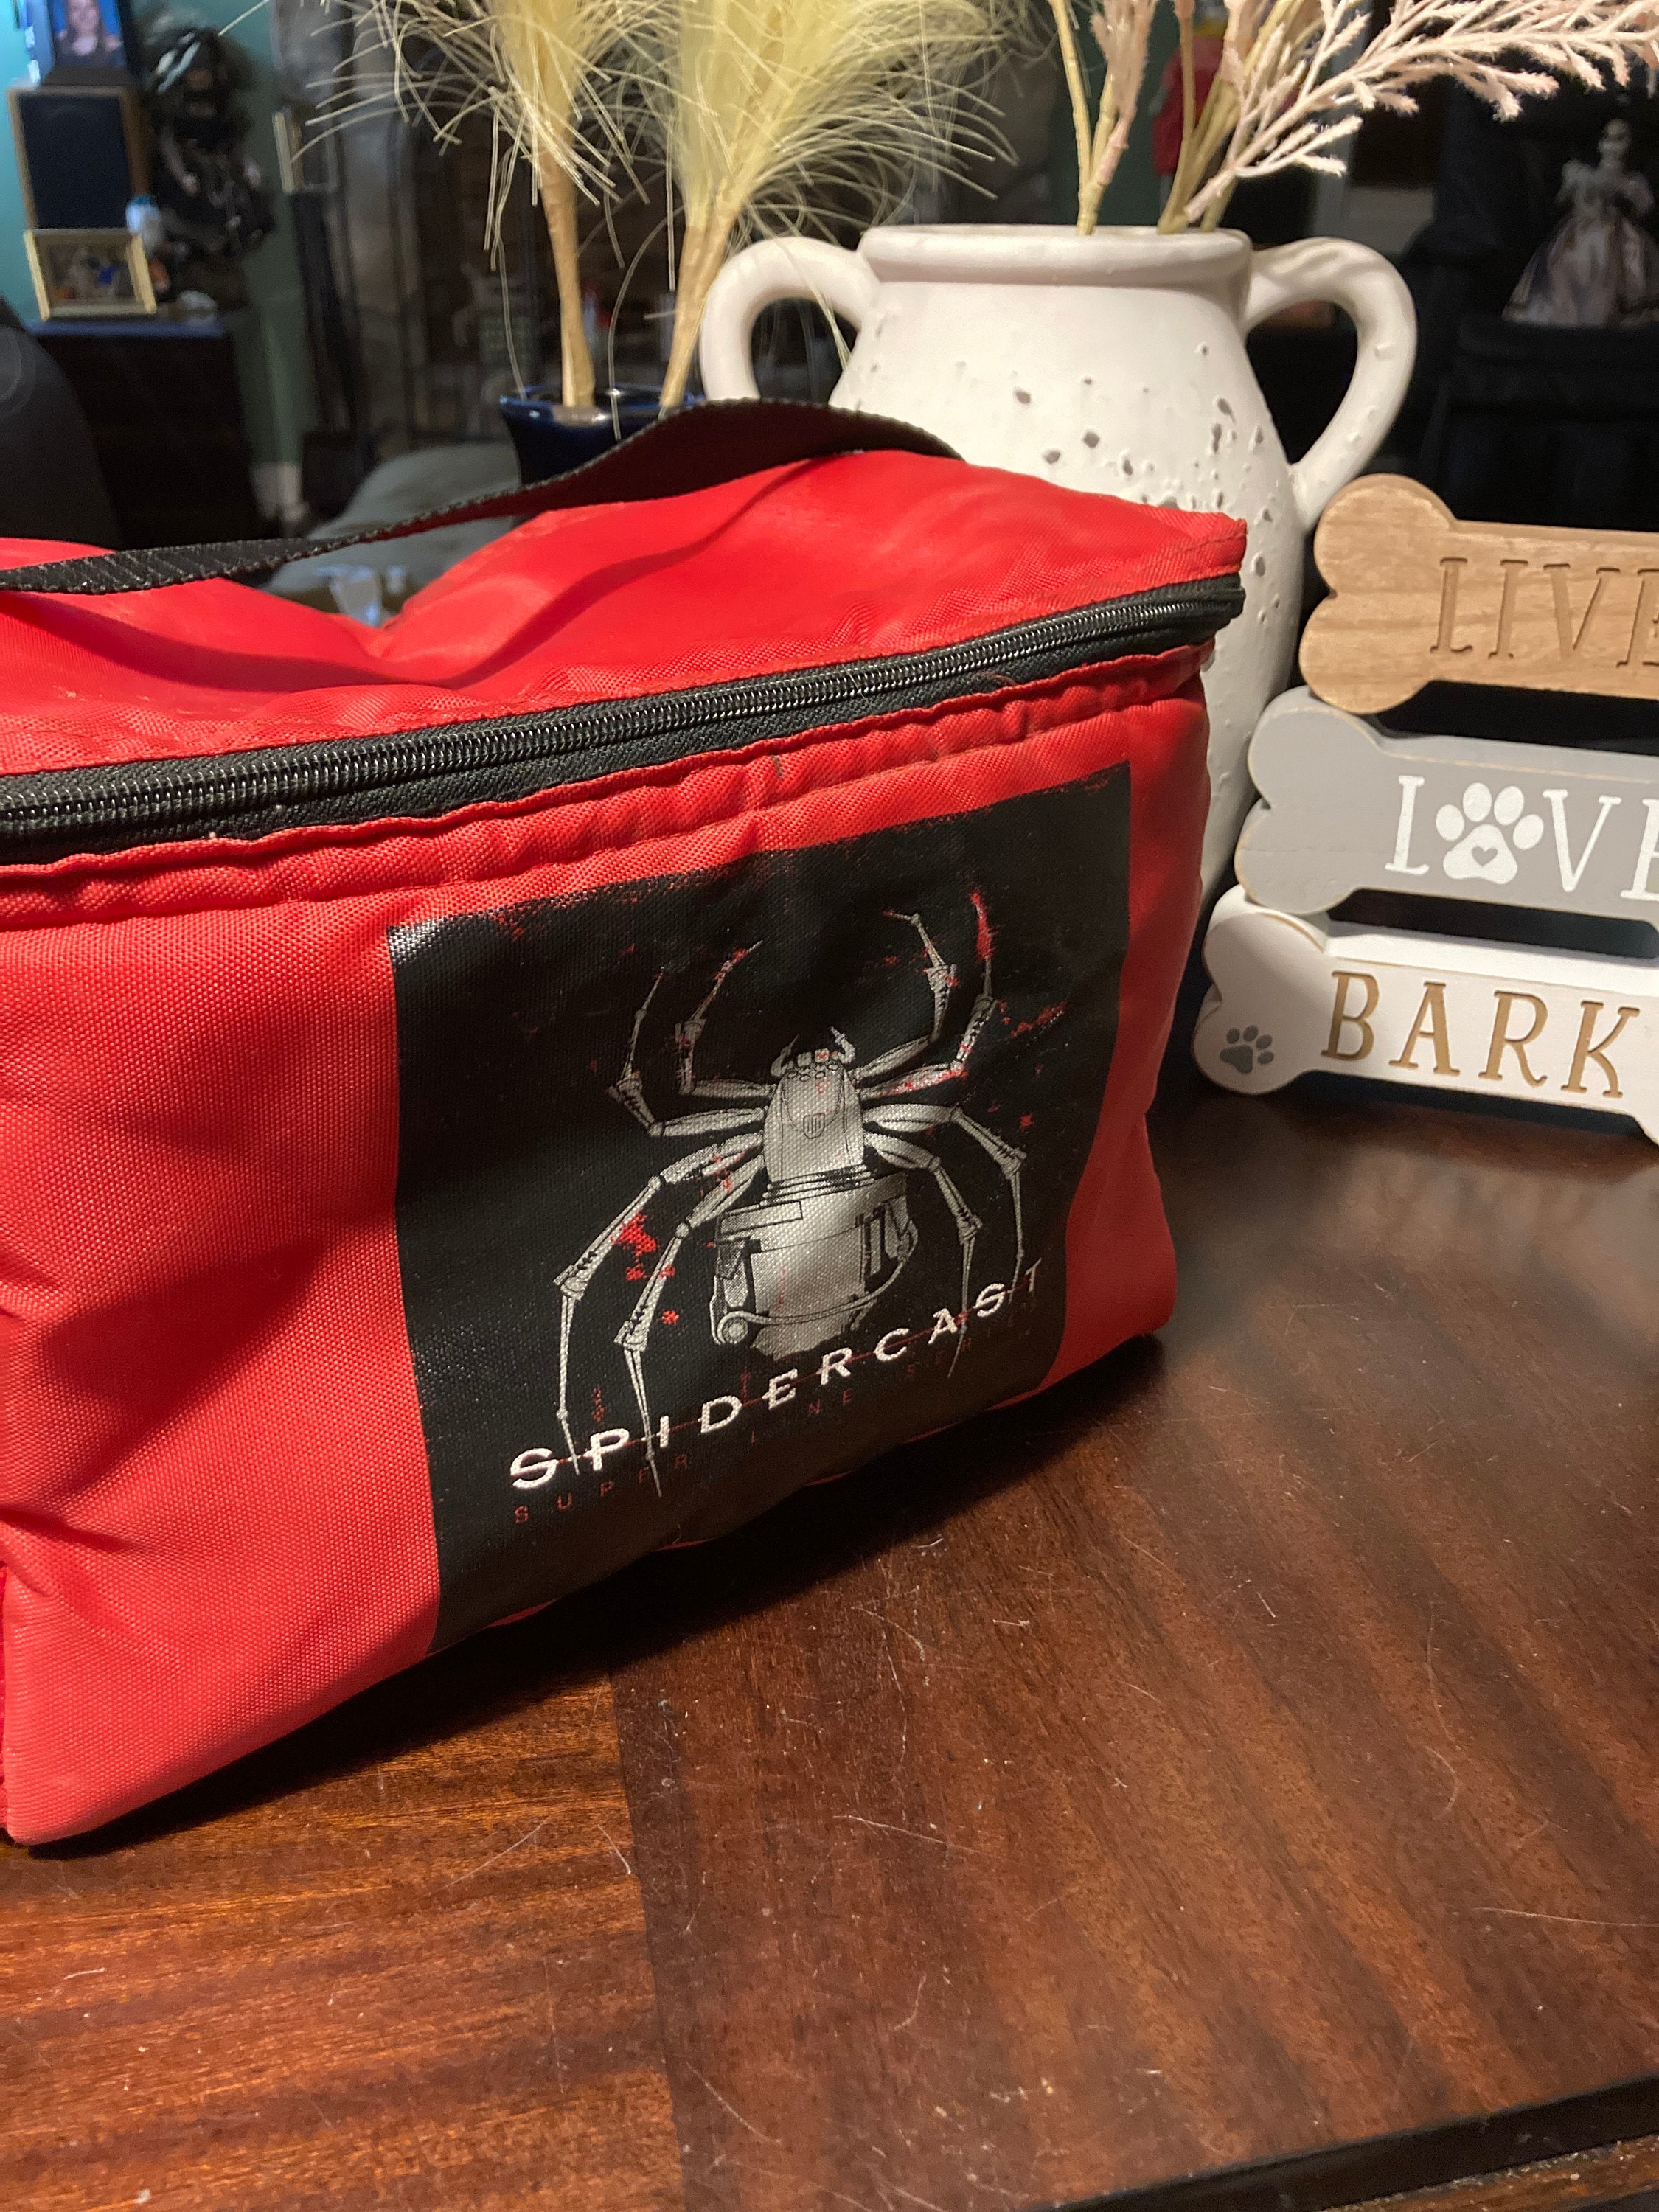 Spider Cast Super Line Series Insulated Cooler Bag Drink Carrier Fishing  Bag RARE 12 X 9 X 8 Tall Red With Black Strap Spidercast Emblem 